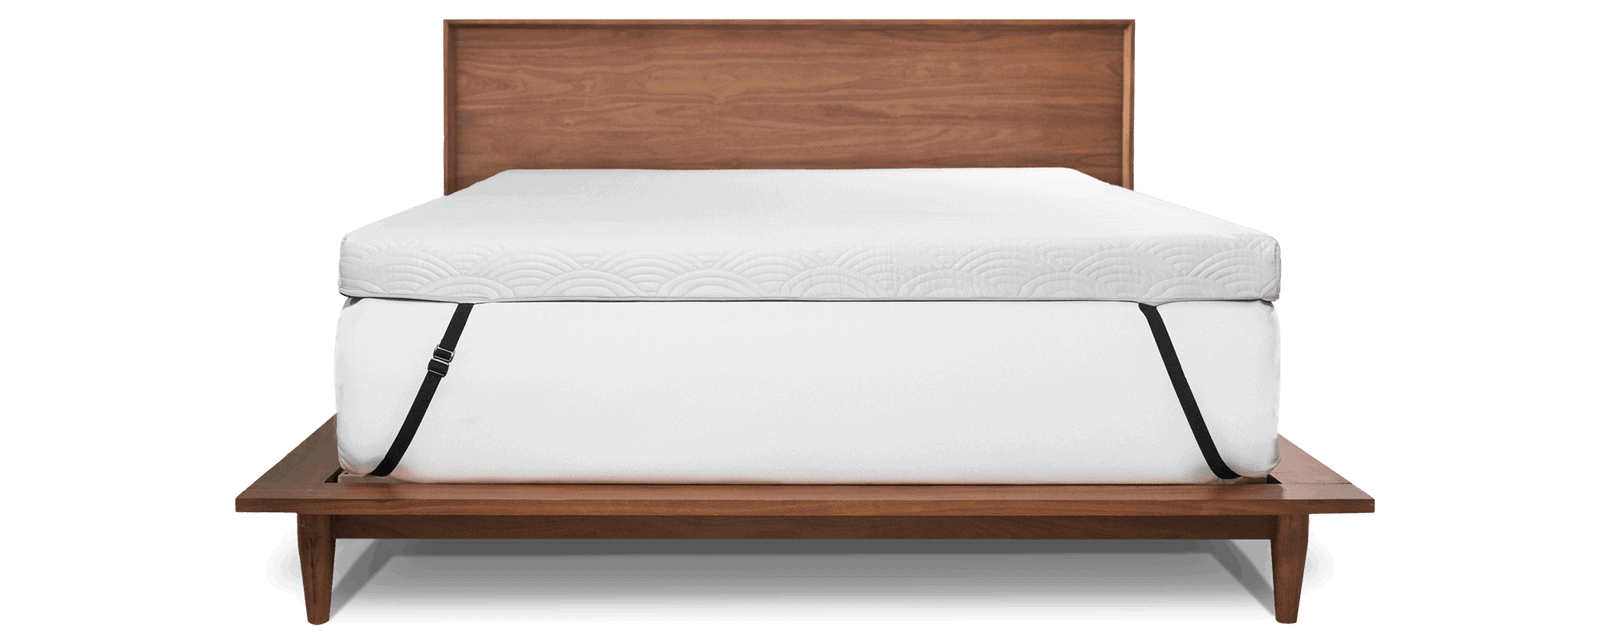 mattress topper for spine support